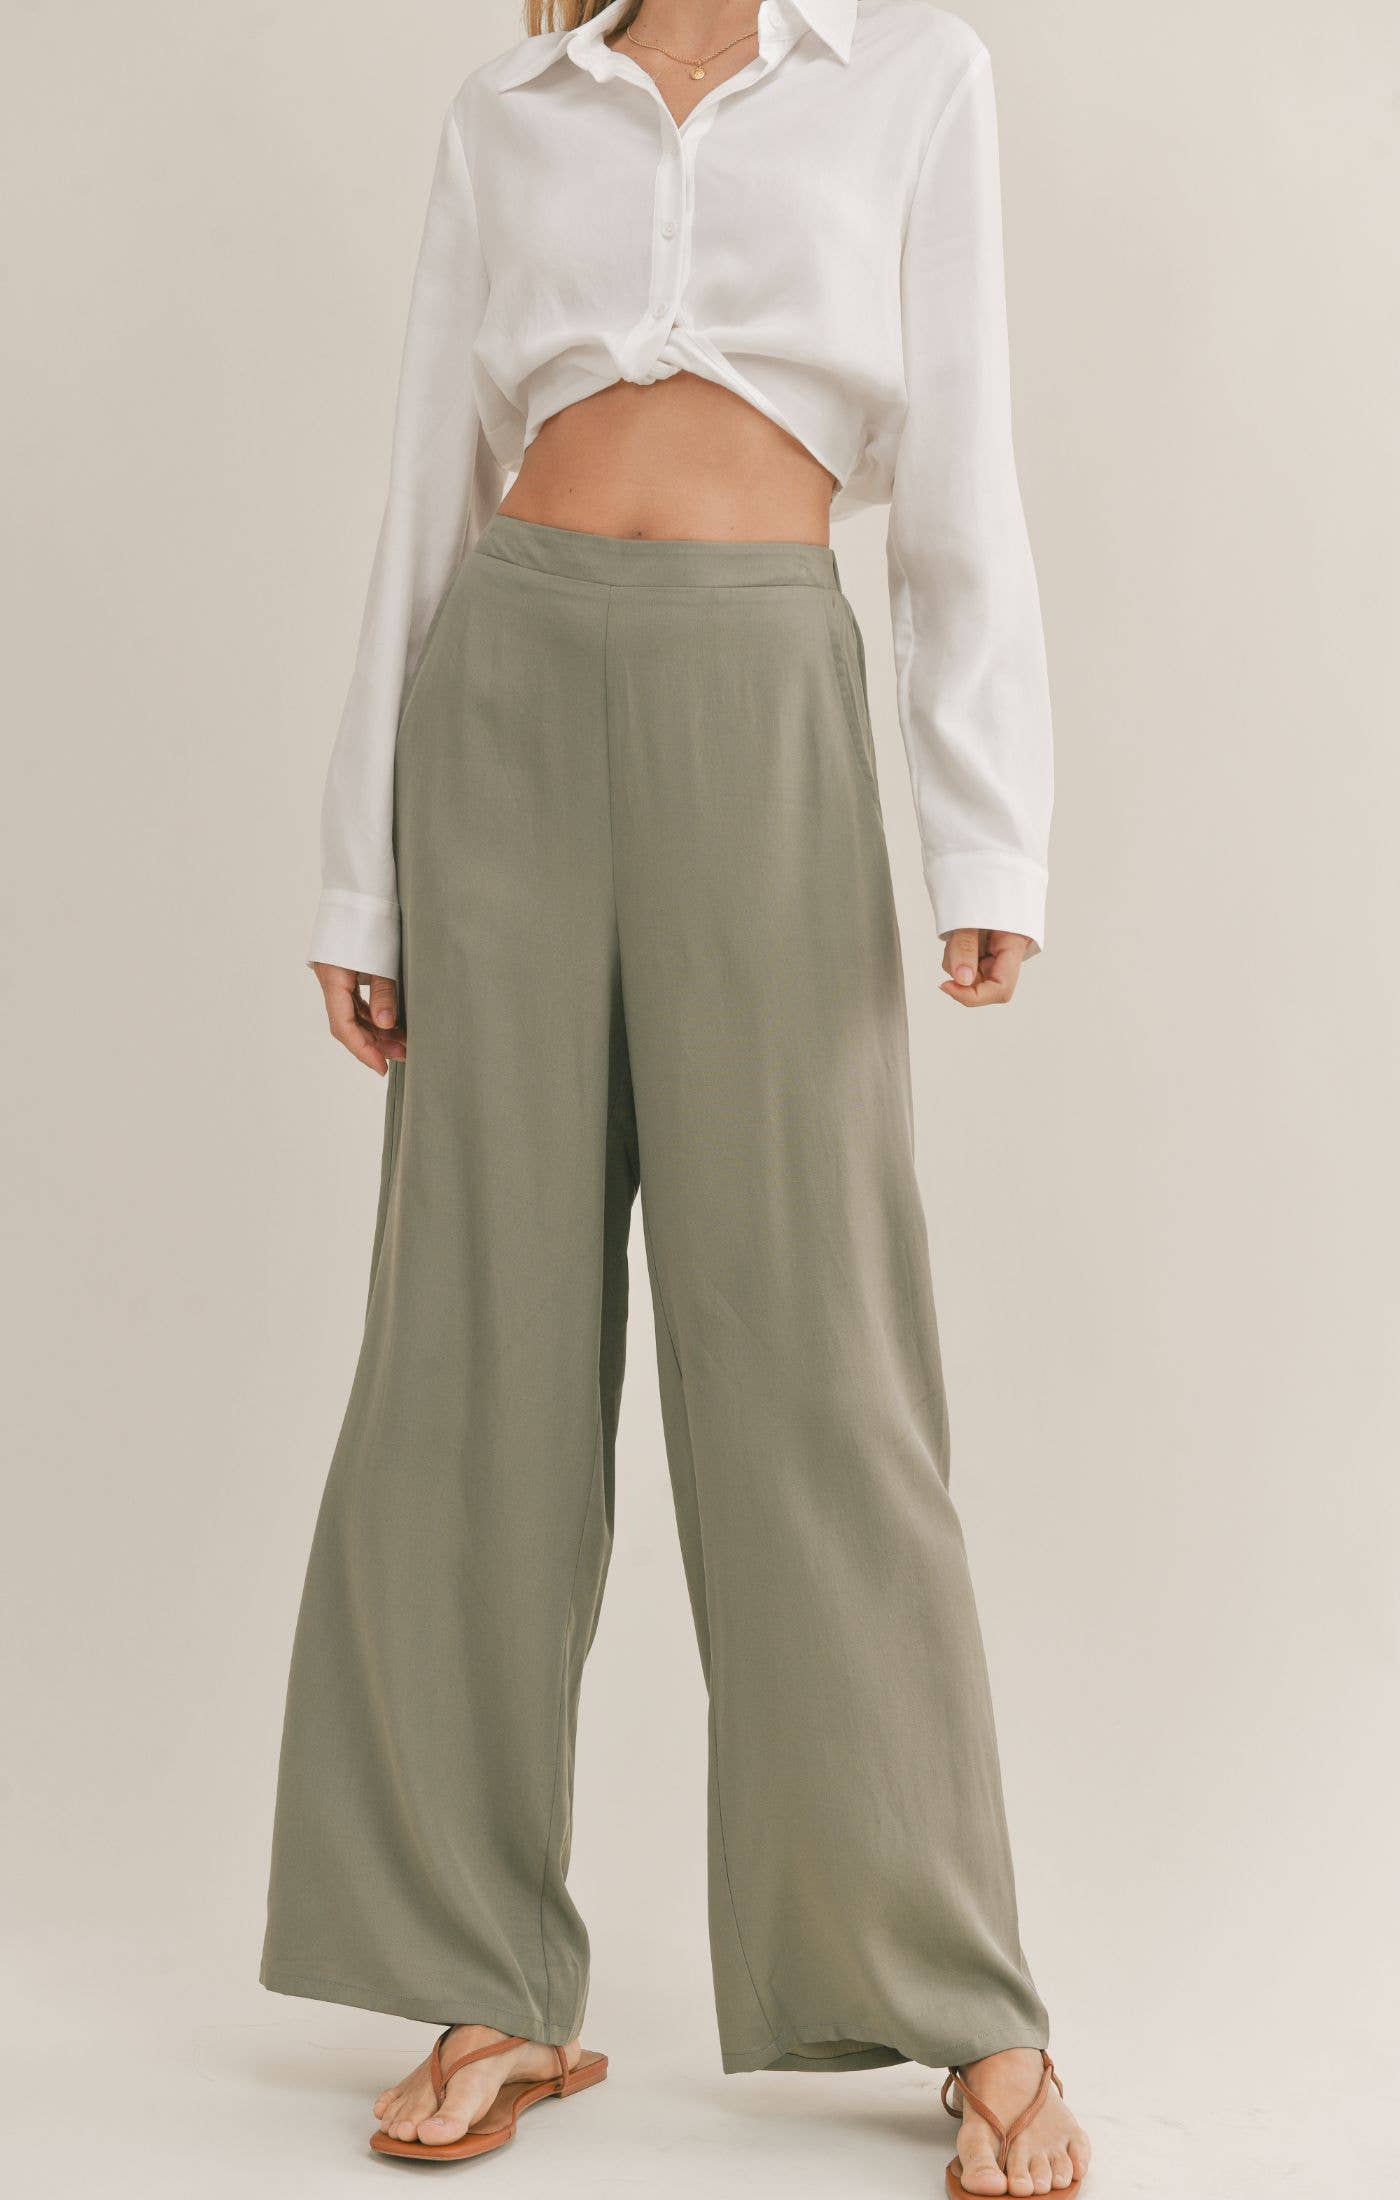 Lighthouse Pants in Olive